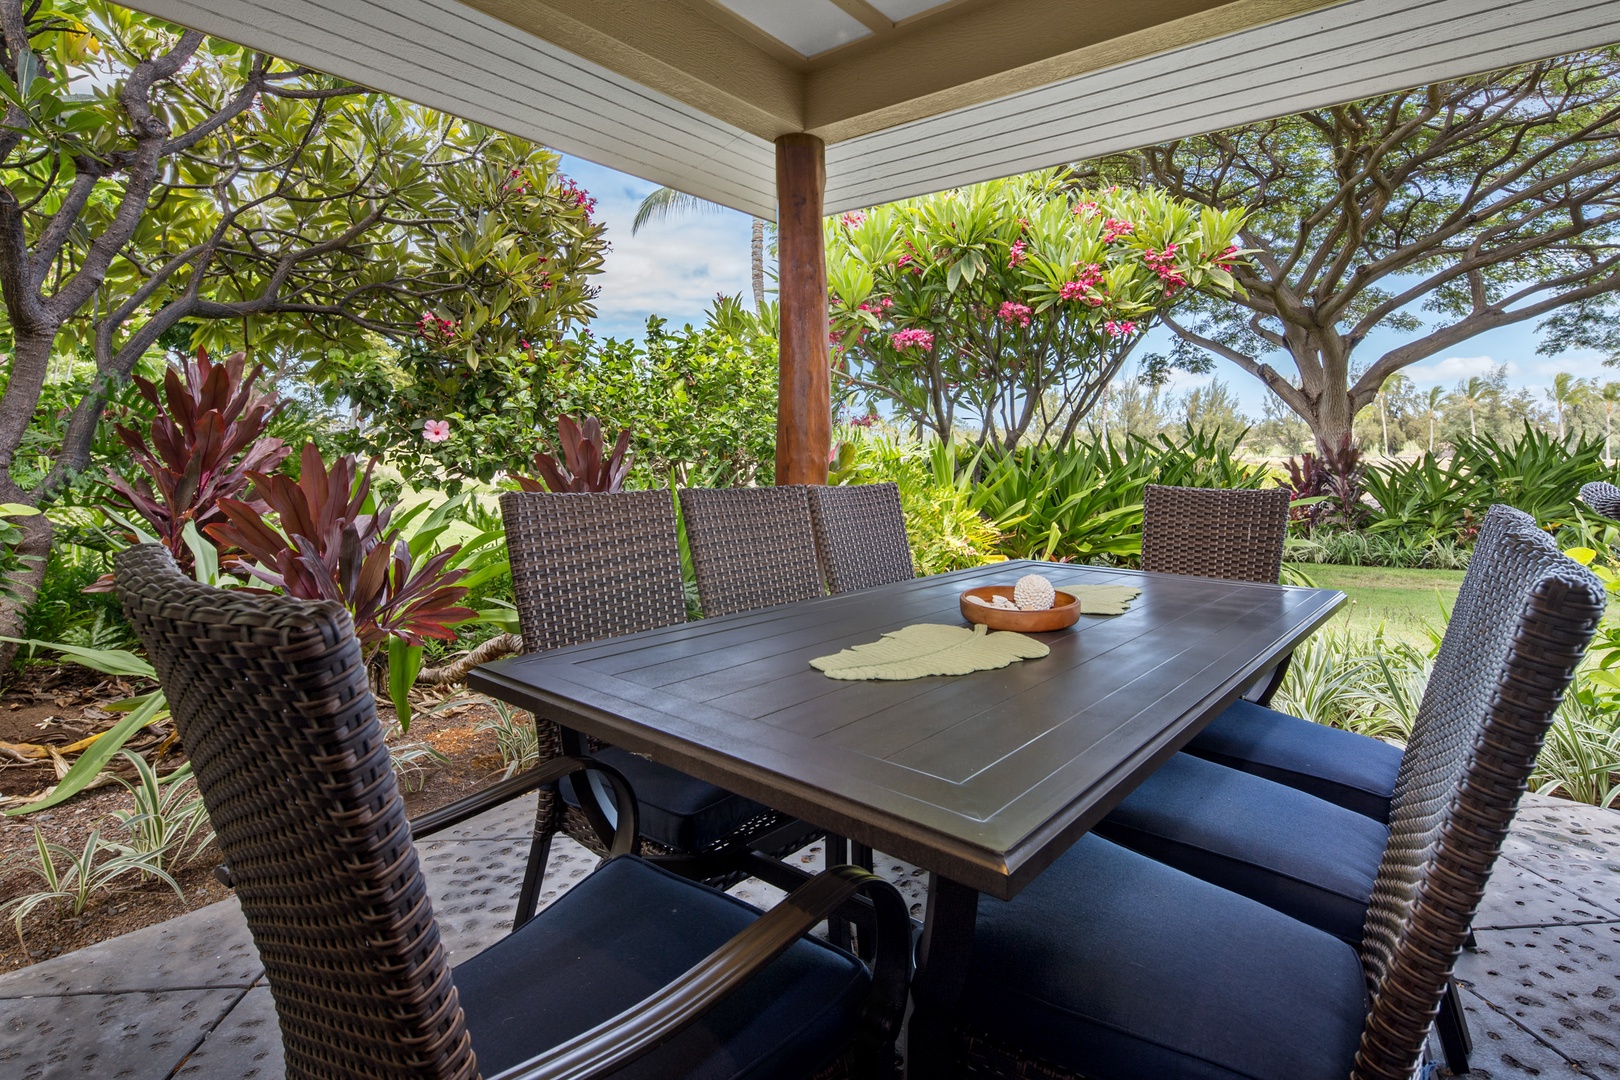 Lanai with outdoor seating and grilling area